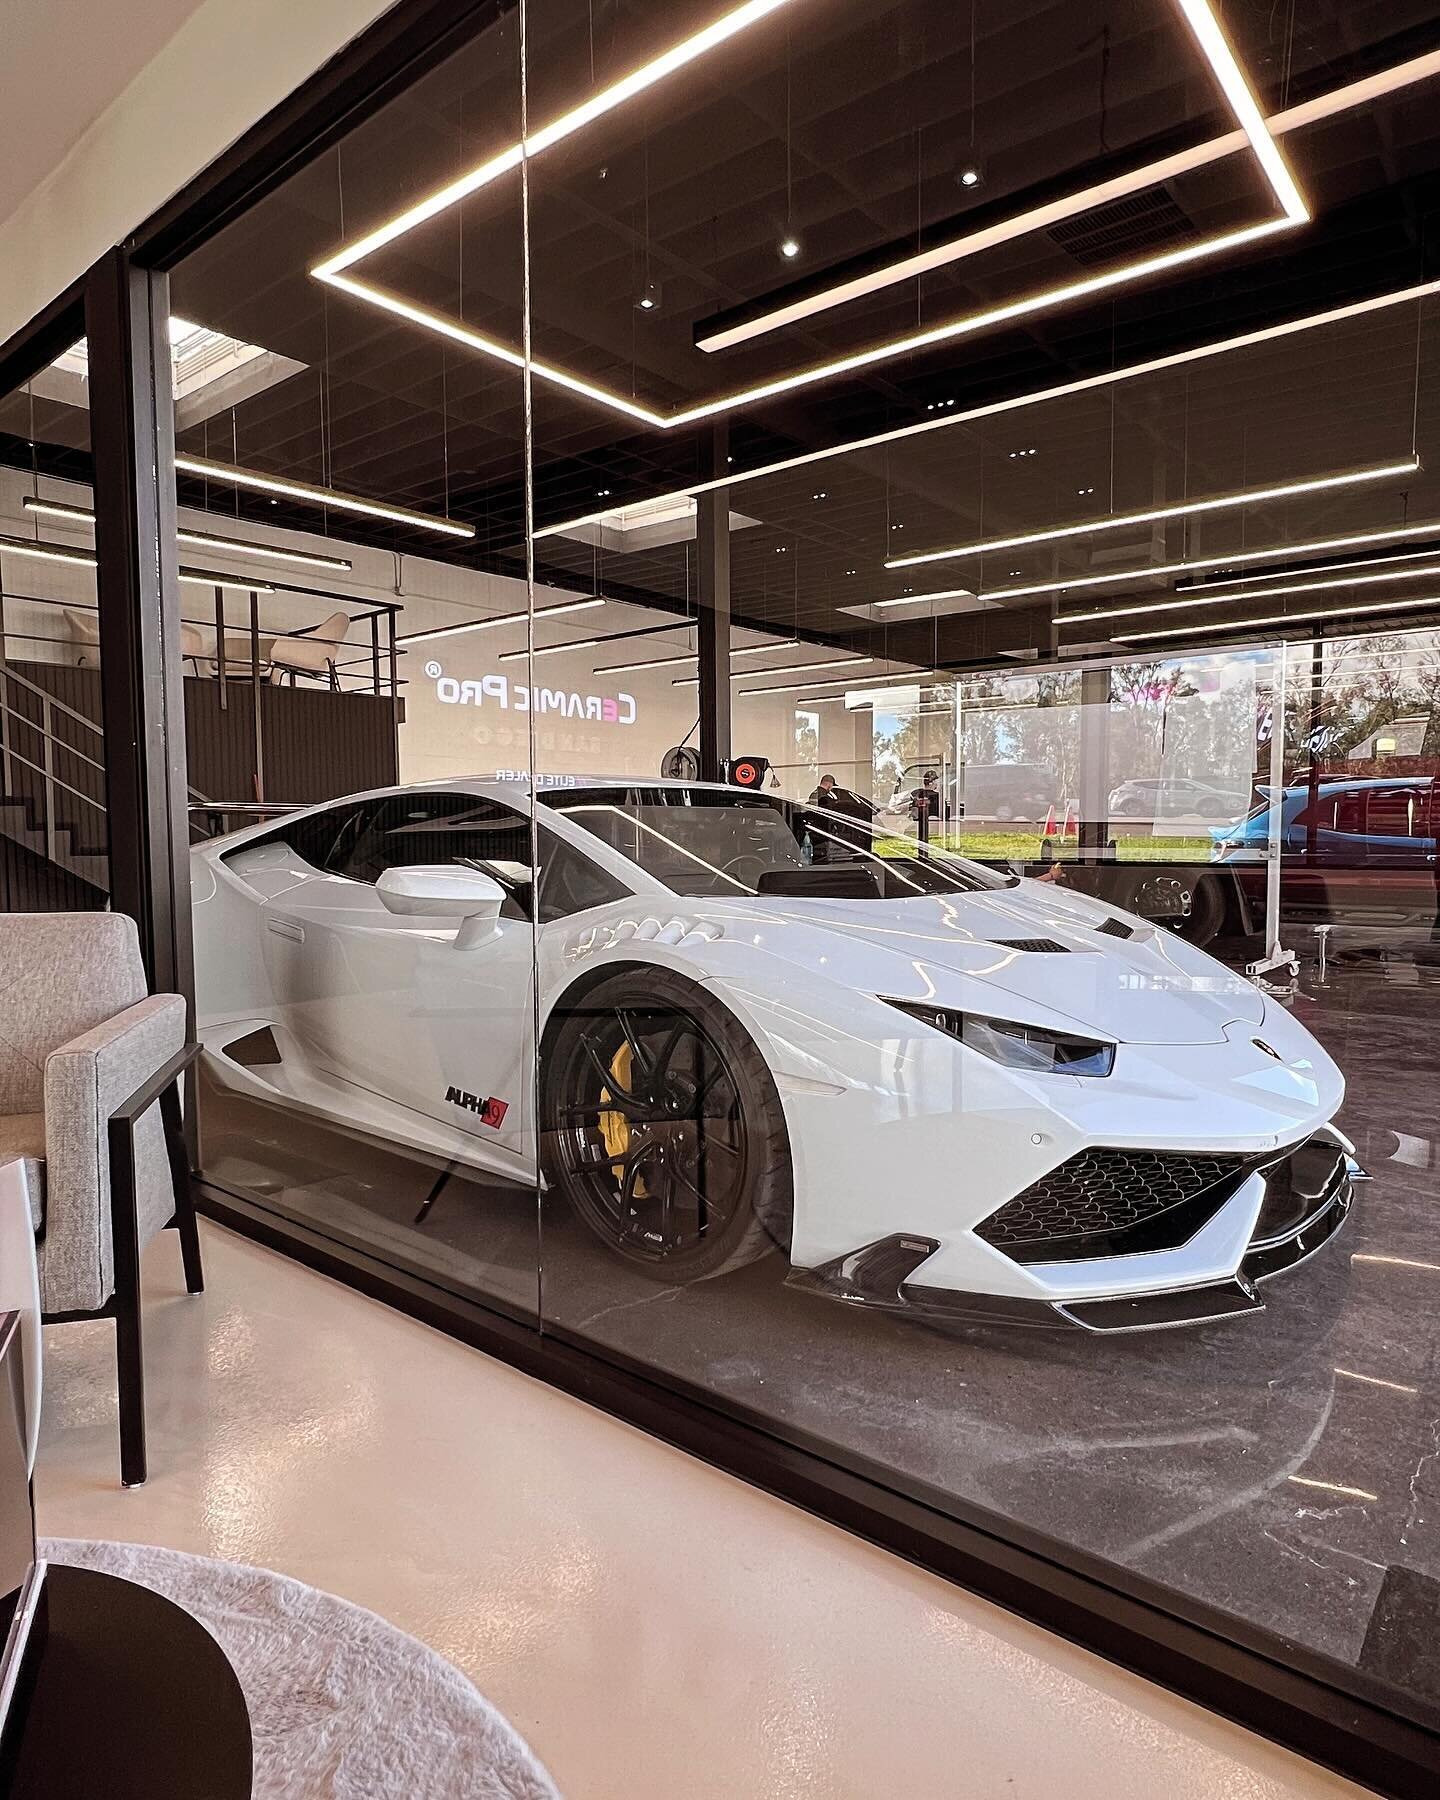 We&rsquo;re at @ceramicprousa new facility in San Diego to check out what they have planned for the start of @legendsrally . They are the title sponsor of Legends Rally Episode 3.  Nice @amsperformance Alpha9 Huracan with @titan7wheels and @vorsteine